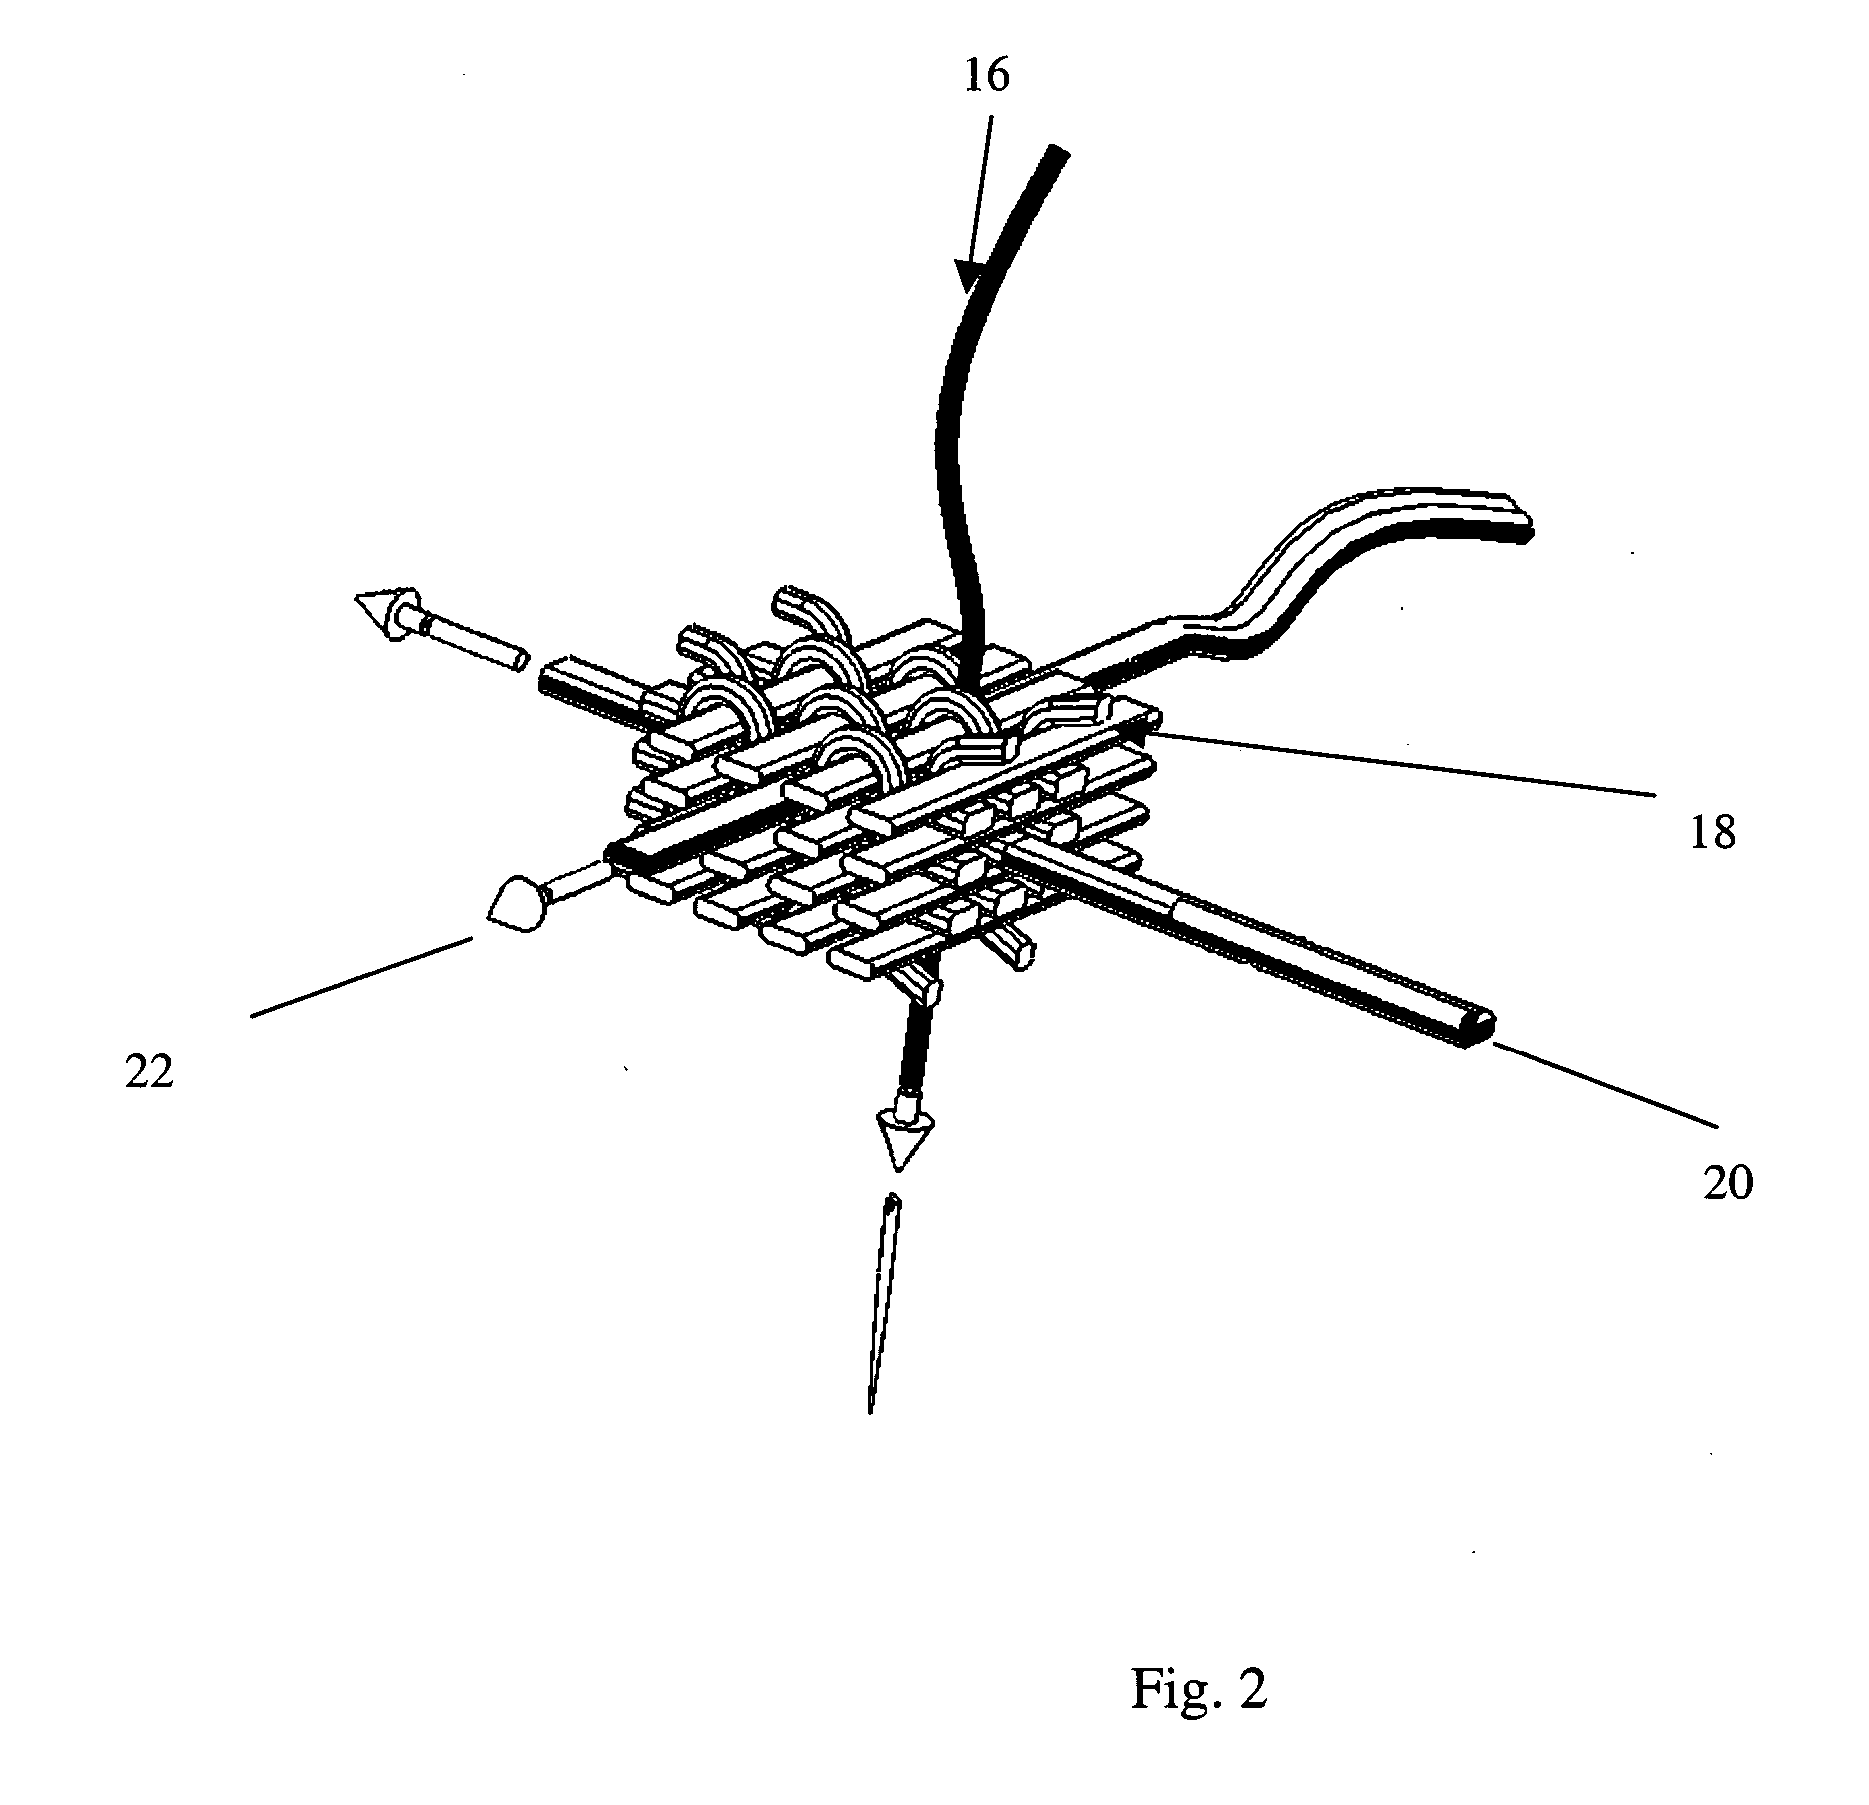 3-D fabrics and fabric preforms for composites having integrated systems, devices, and/or networks